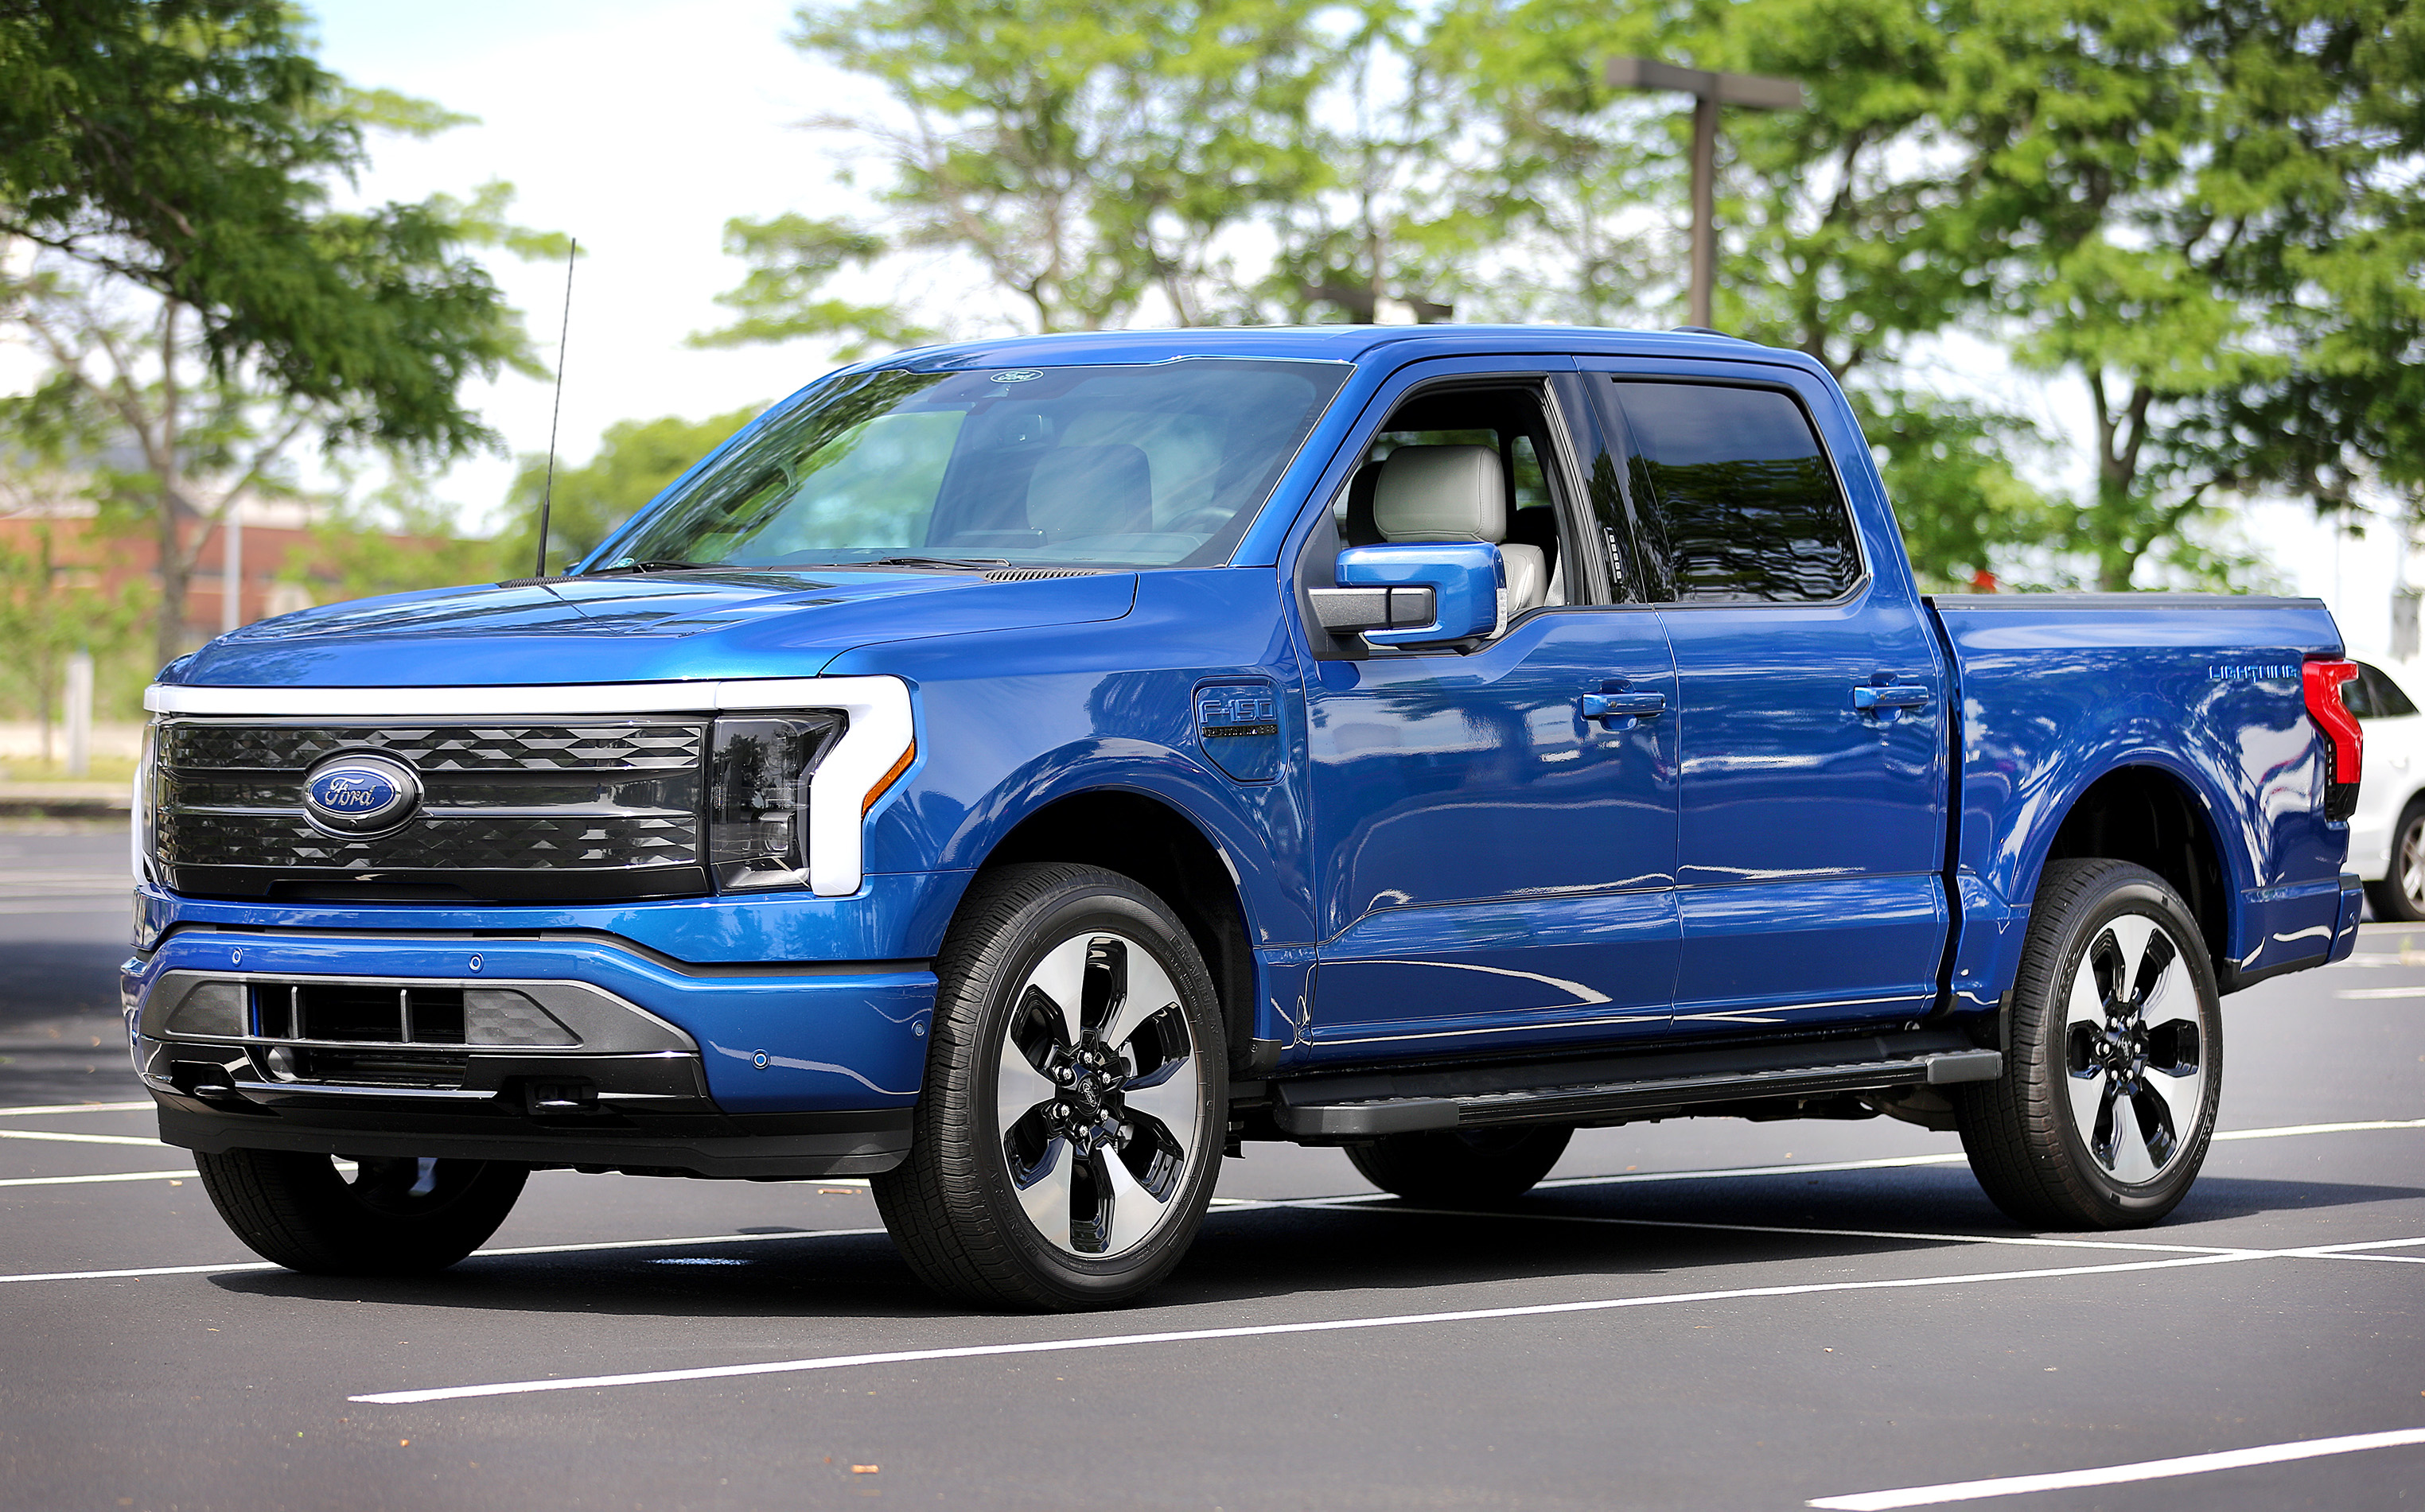 Frun Facts About the 2022 Ford F-150 Lightning's Frunk